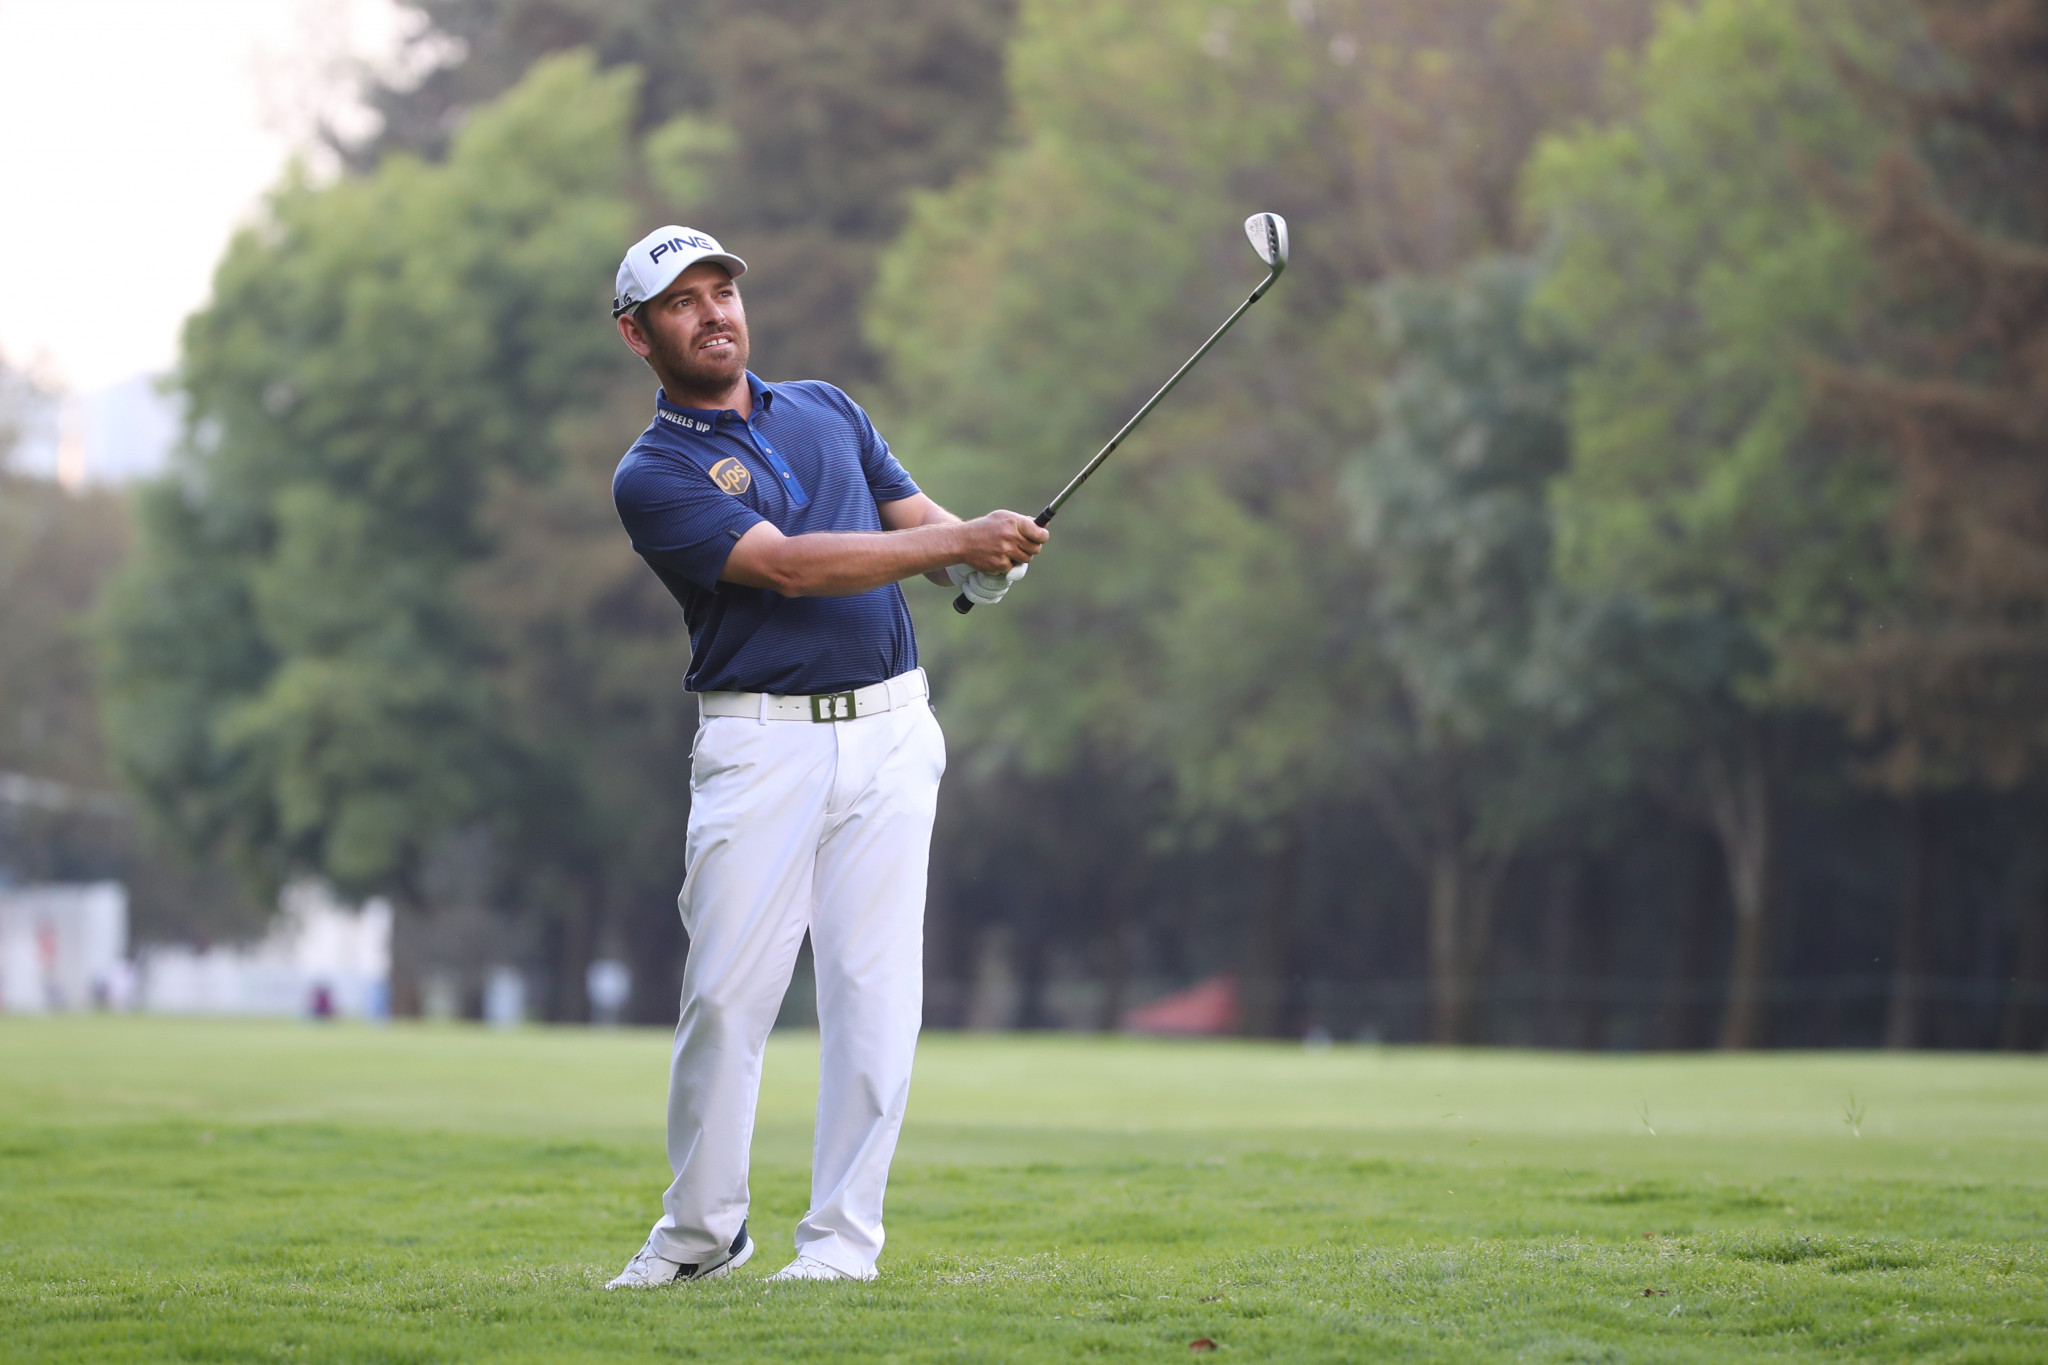 Oosthuizen leads after day one of World Golf Championship in Mexico